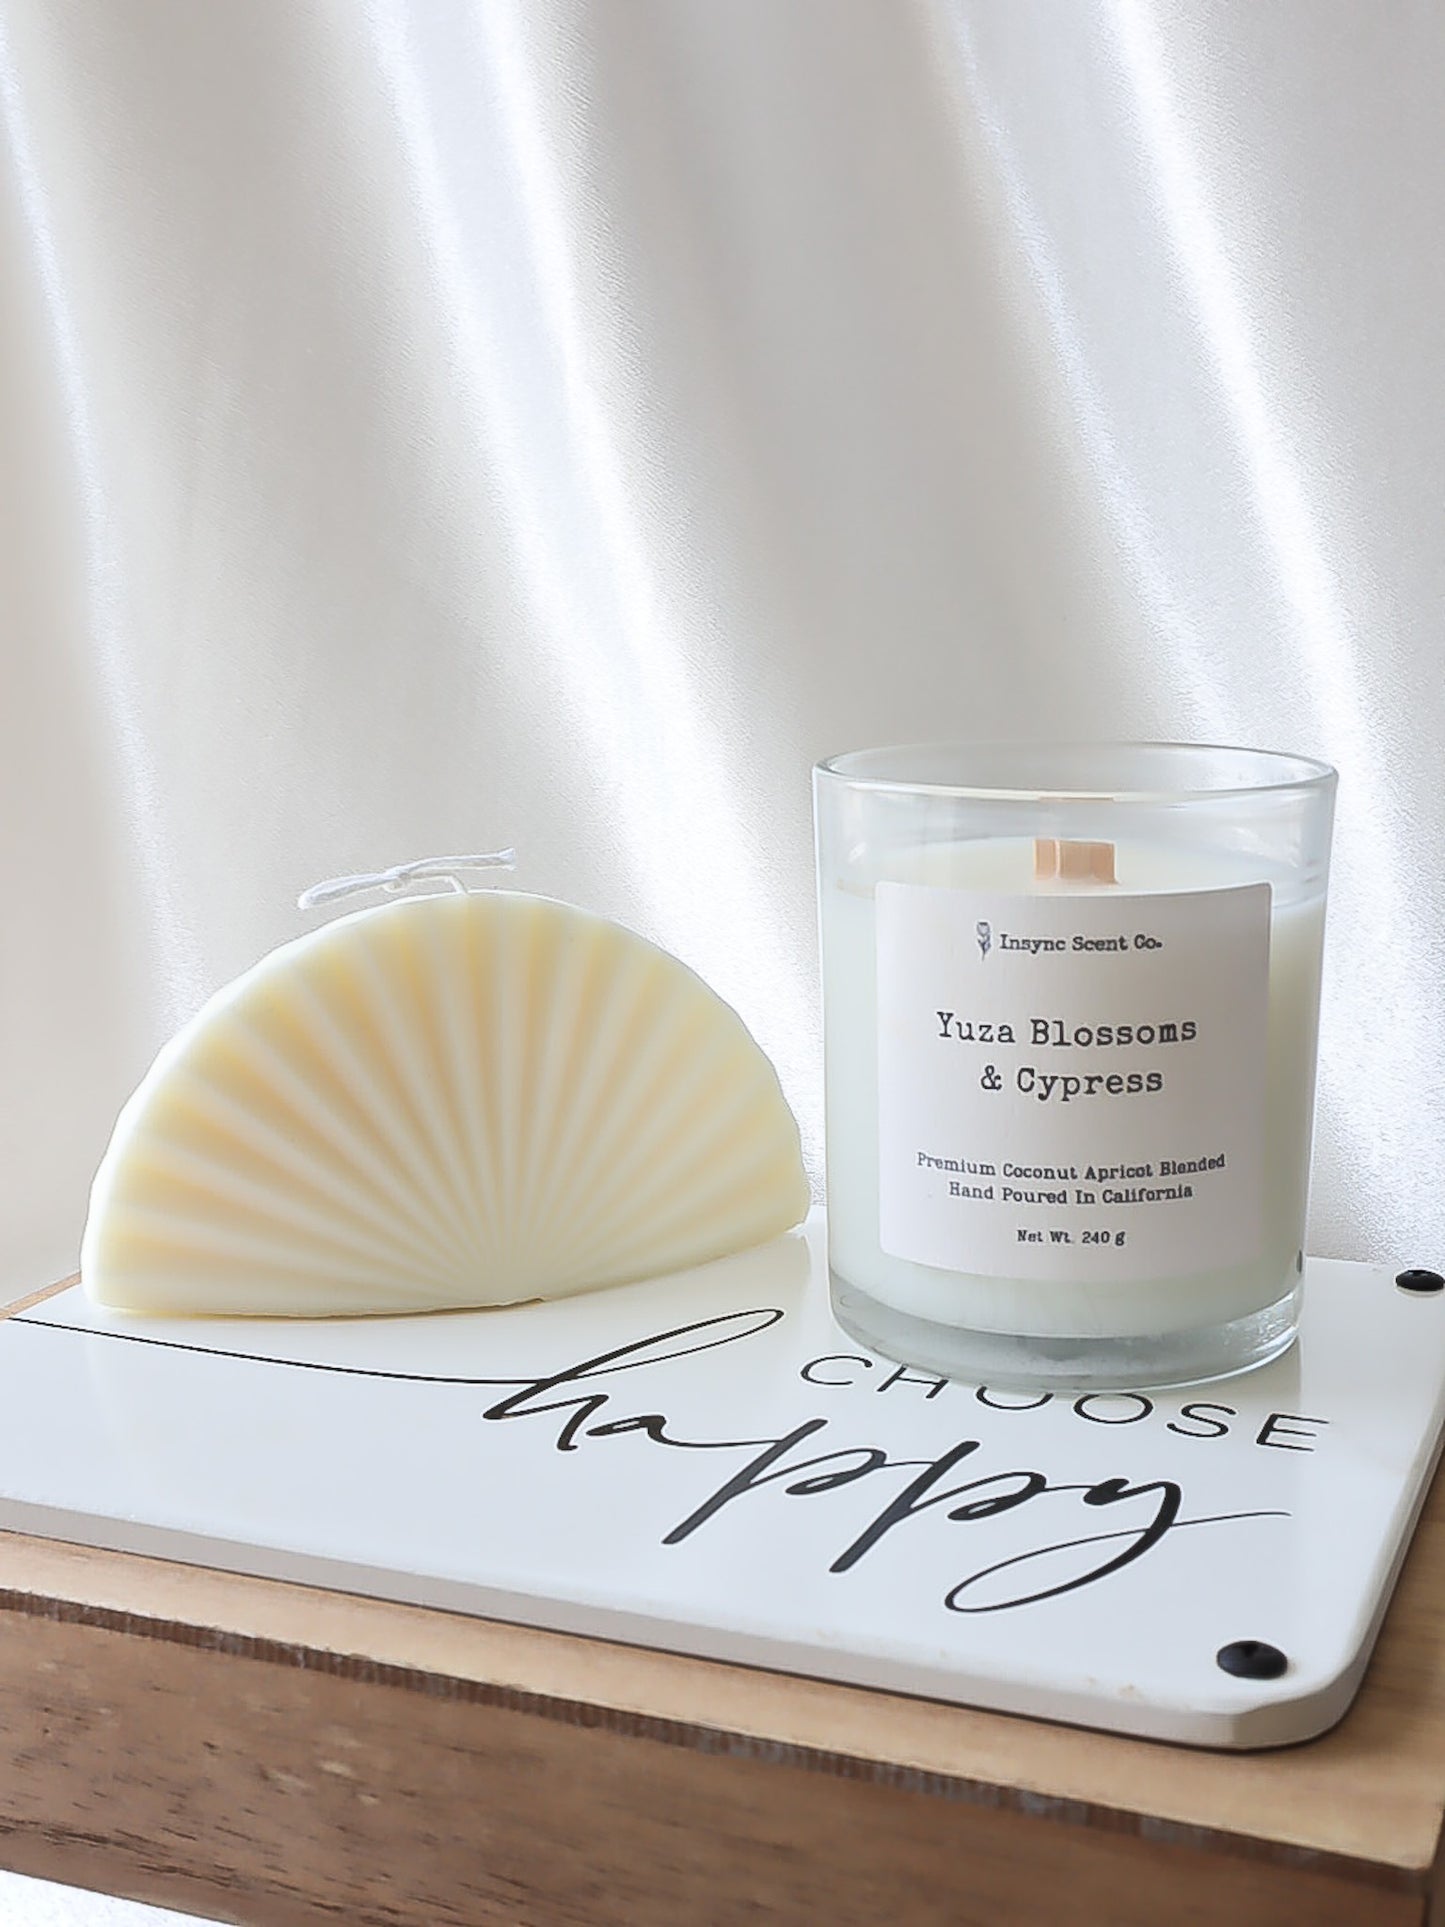 Yuza Blossom & Cypress Candle